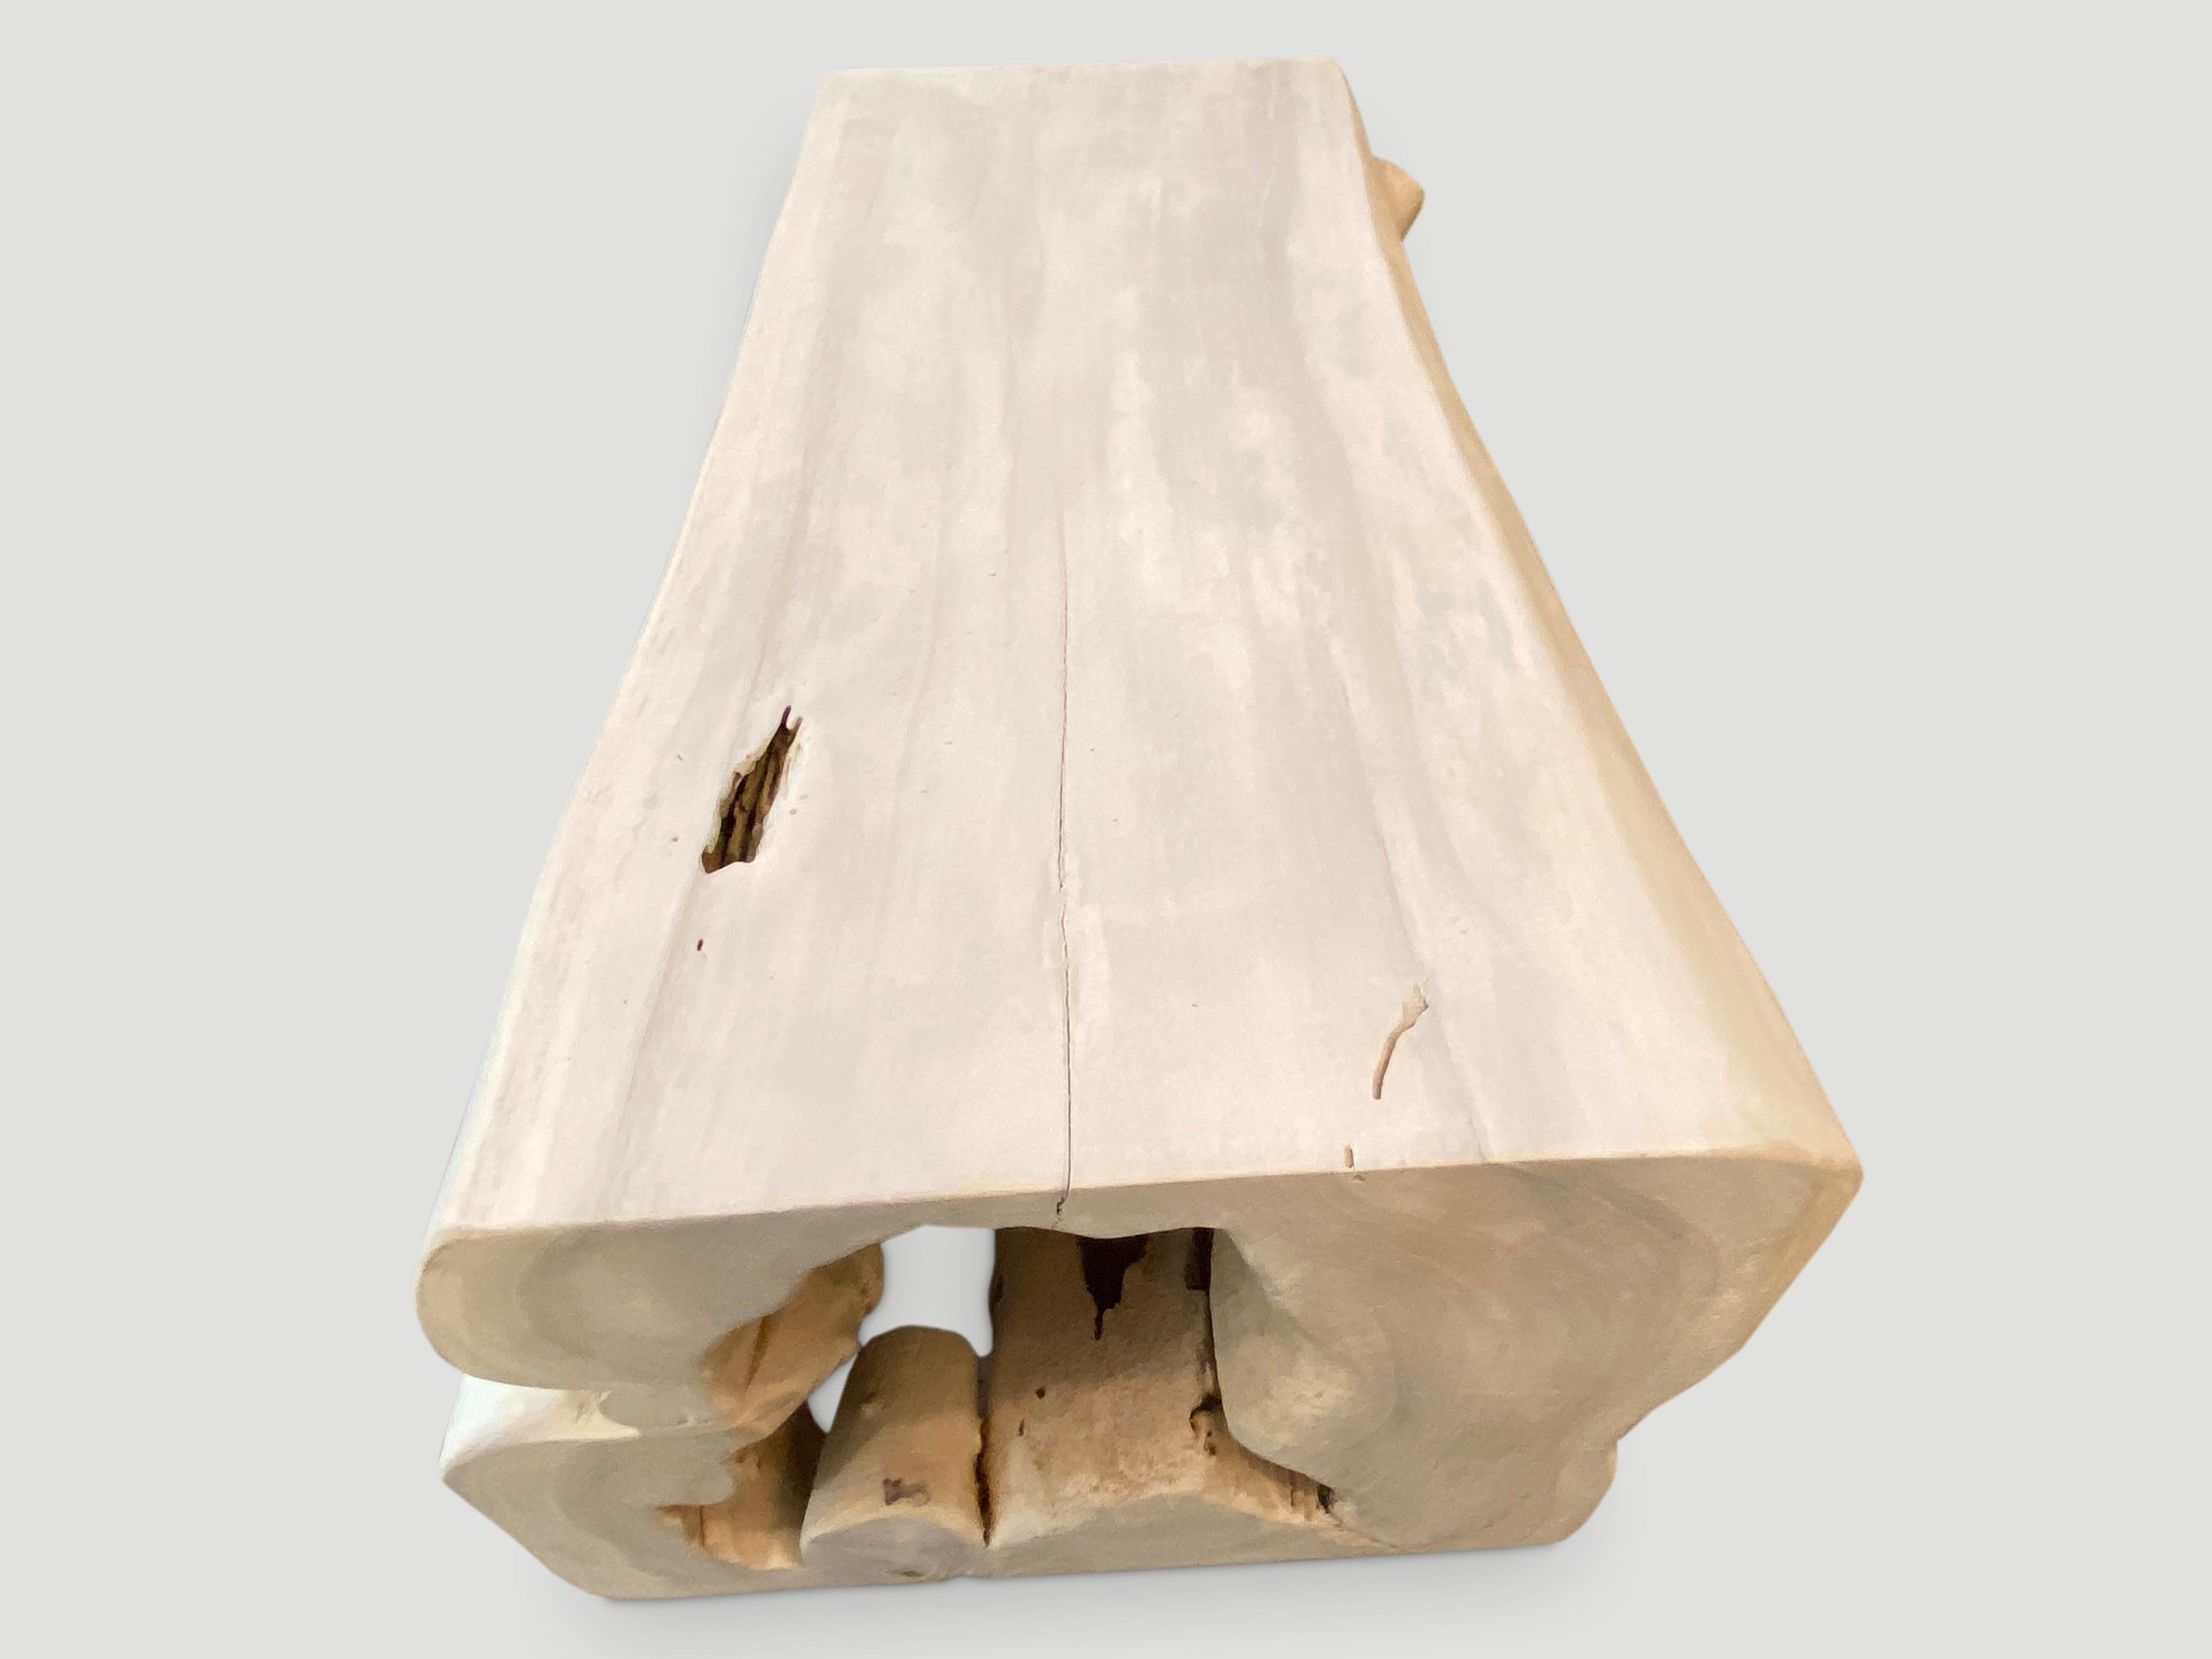 Andrianna Shamaris St. Barts Reclaimed Teak Wood Coffee Table or Bench In Excellent Condition For Sale In New York, NY